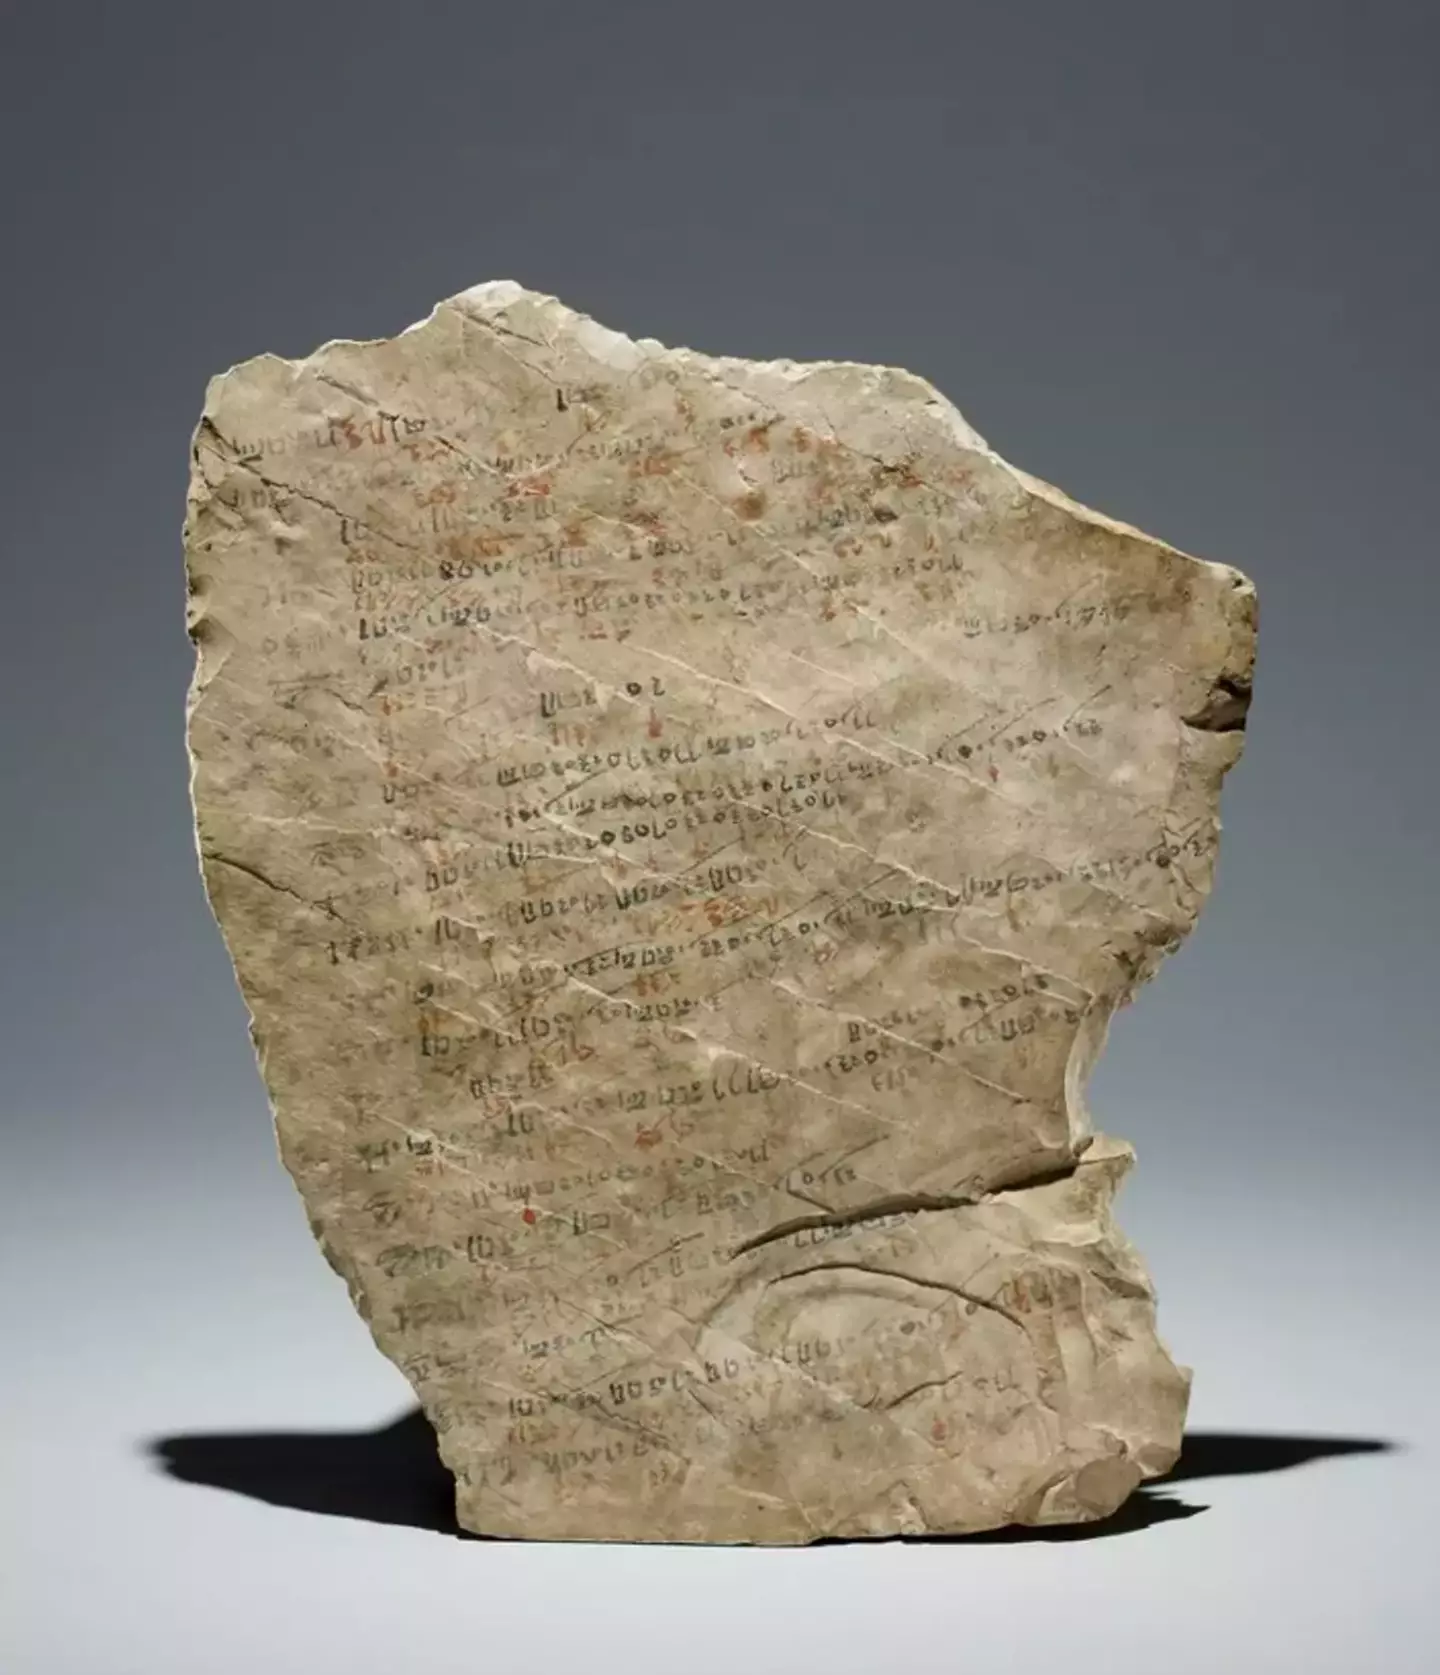 The list contained several ancient excuses to miss work. (The British Museum)